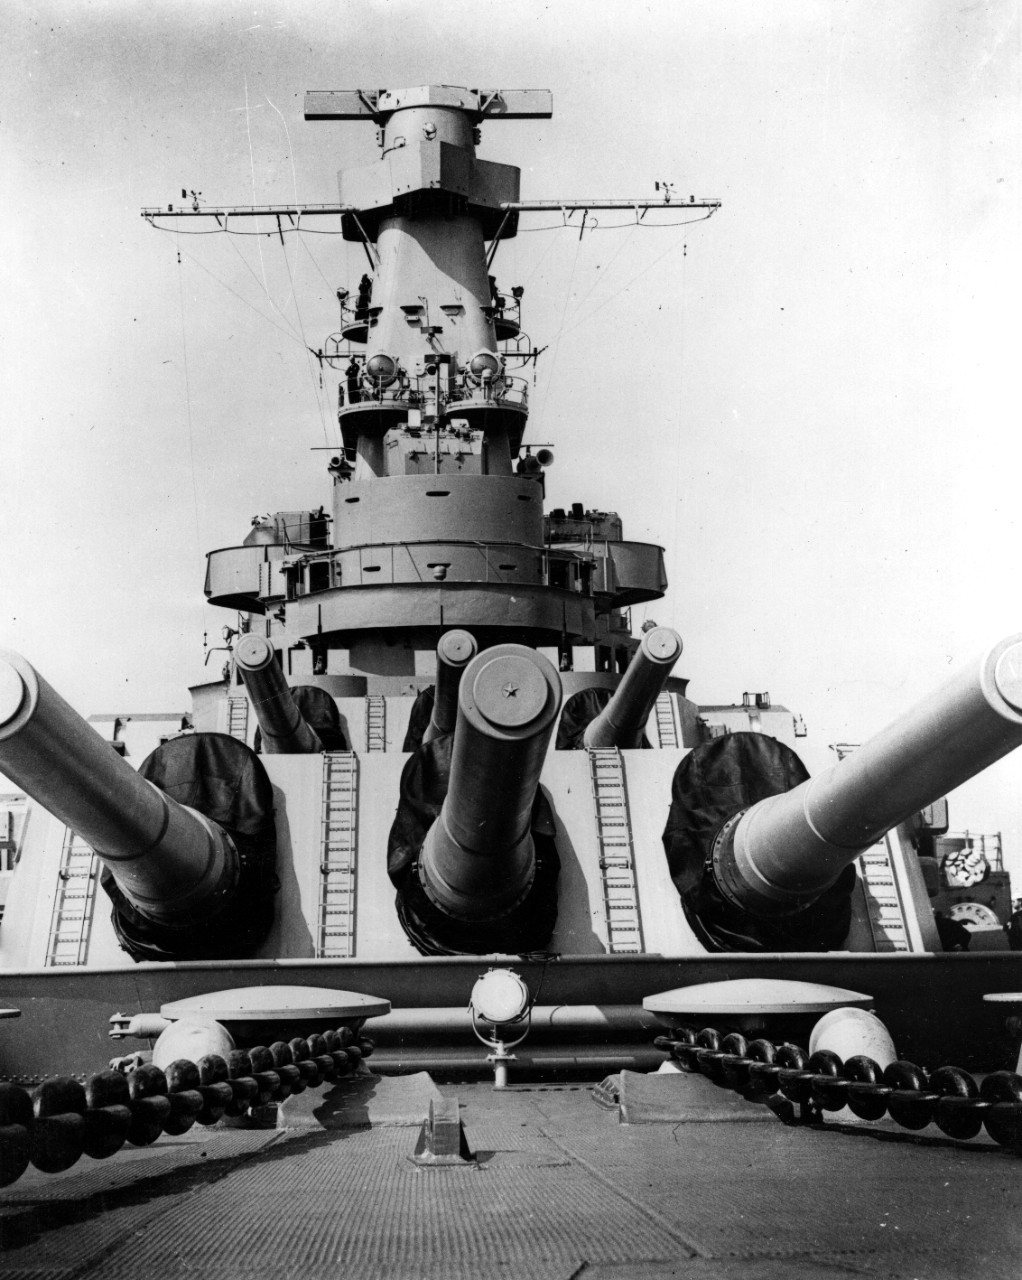 A view of Indiana and her forward 16-inch 45-caliber guns, taken at Newport News, Va., on the day of her commissioning, 30 April 1942. Note the anchor chains and capstains, armored conning tower and Mk 38 main battery director atop her superstruc...